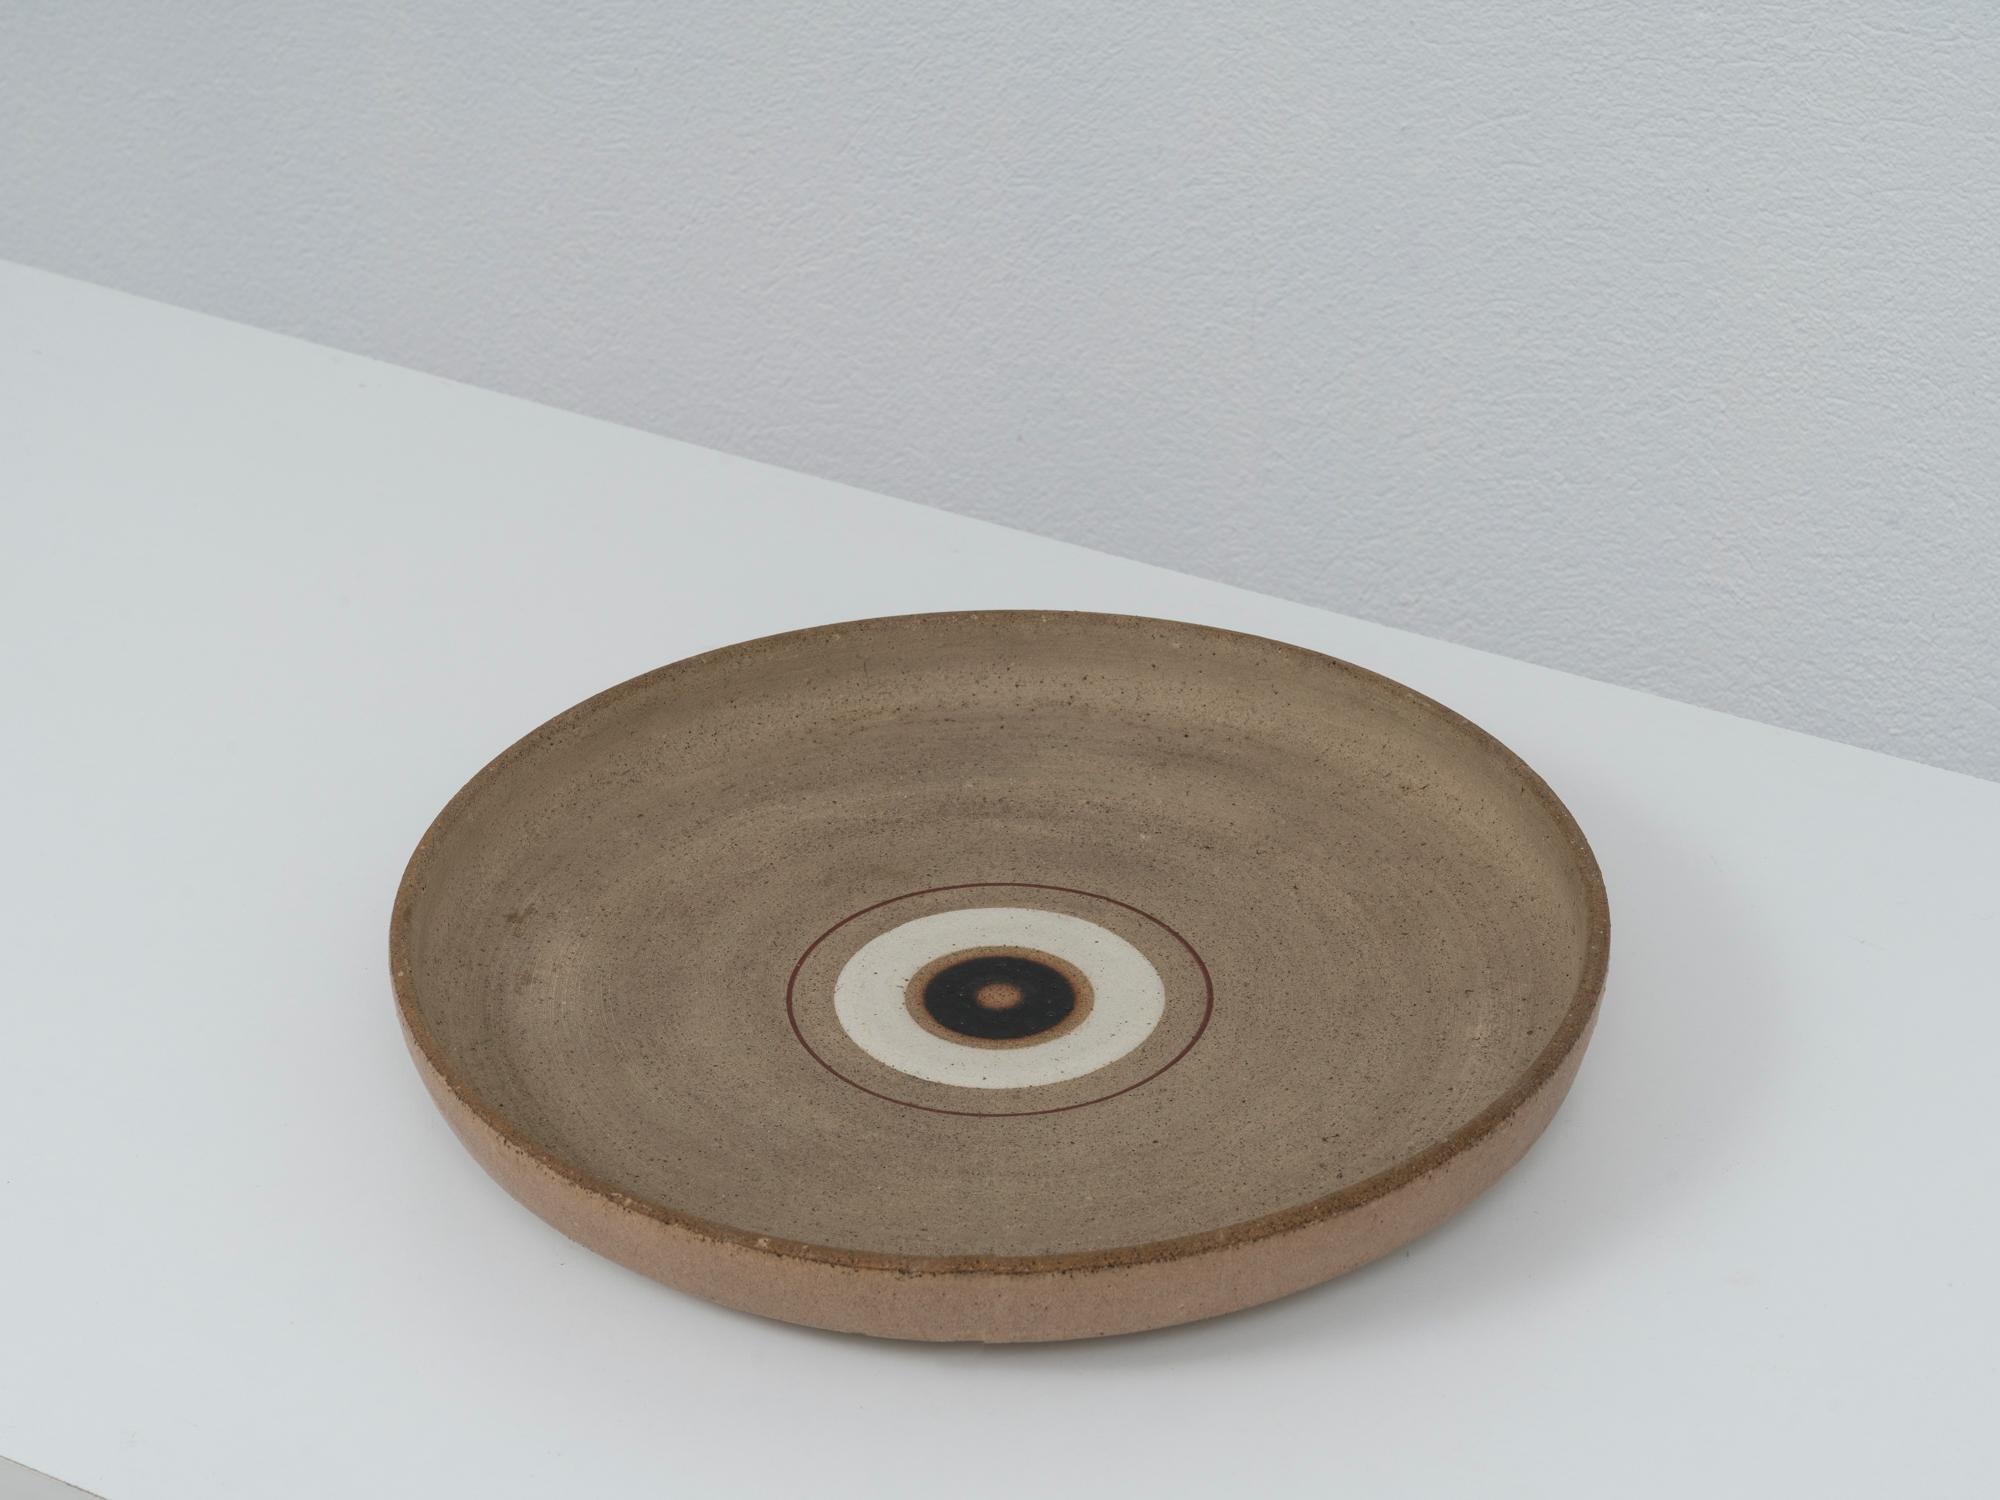 Beautiful 1970s large center plate by Italian ceramic master Bruno Gambone, in rich earthly tones with burnished brown, cream and crimson accents. Tactile raw finish with smooth details, decorated with Gambone's iconic concentric decor.
The piece